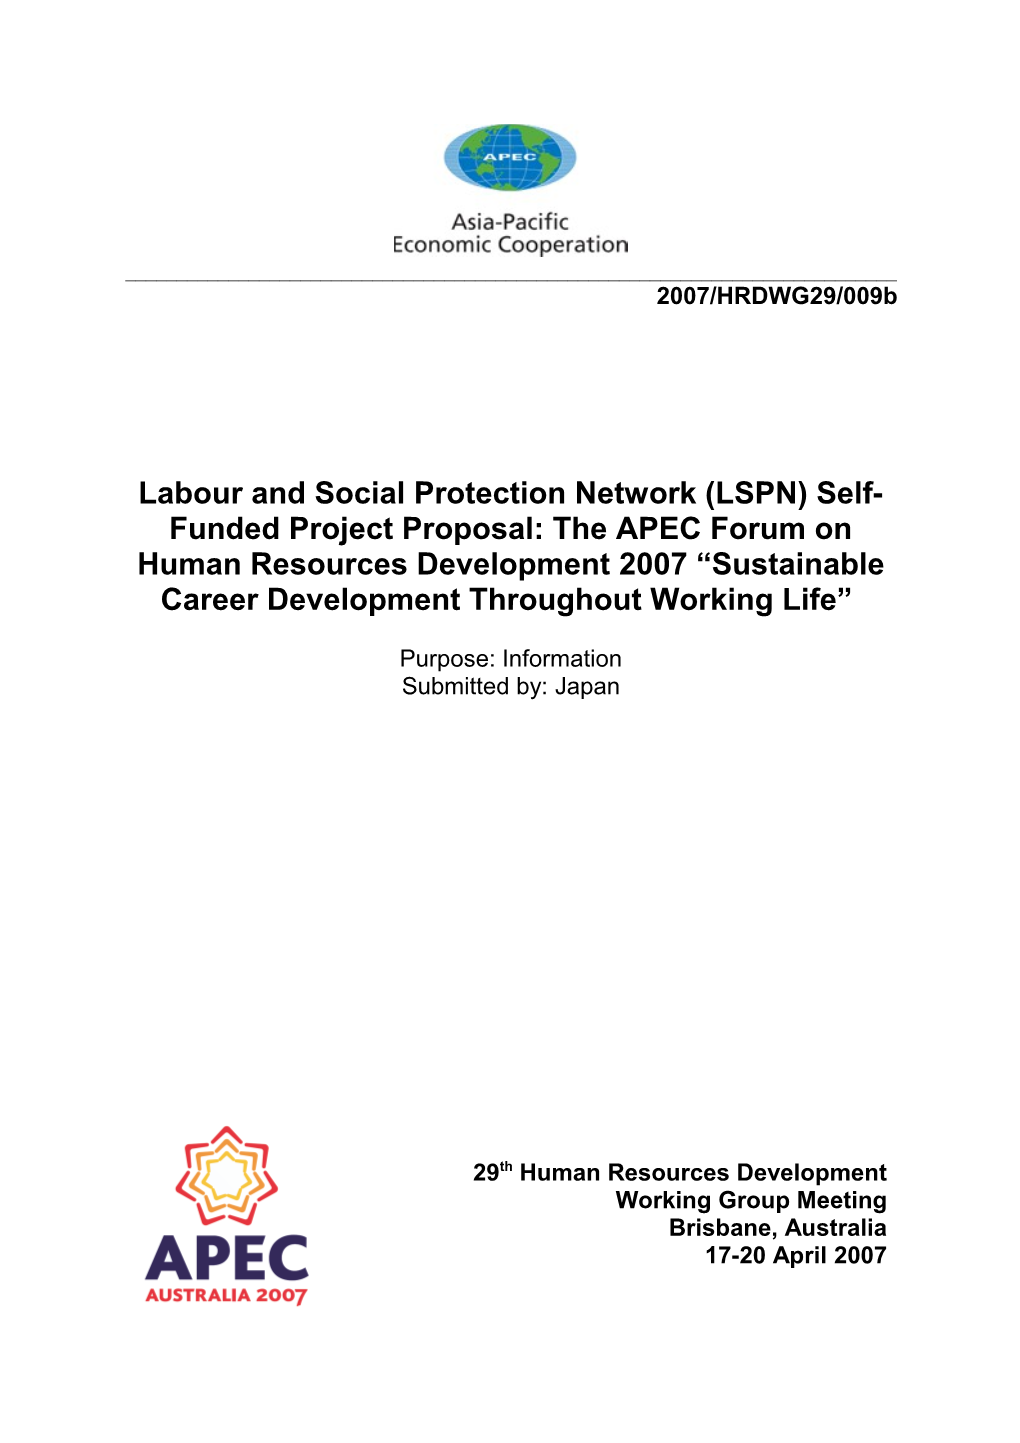 Labour and Social Protection Network (LSPN) Self-Funded Project Proposal: the APEC Forum